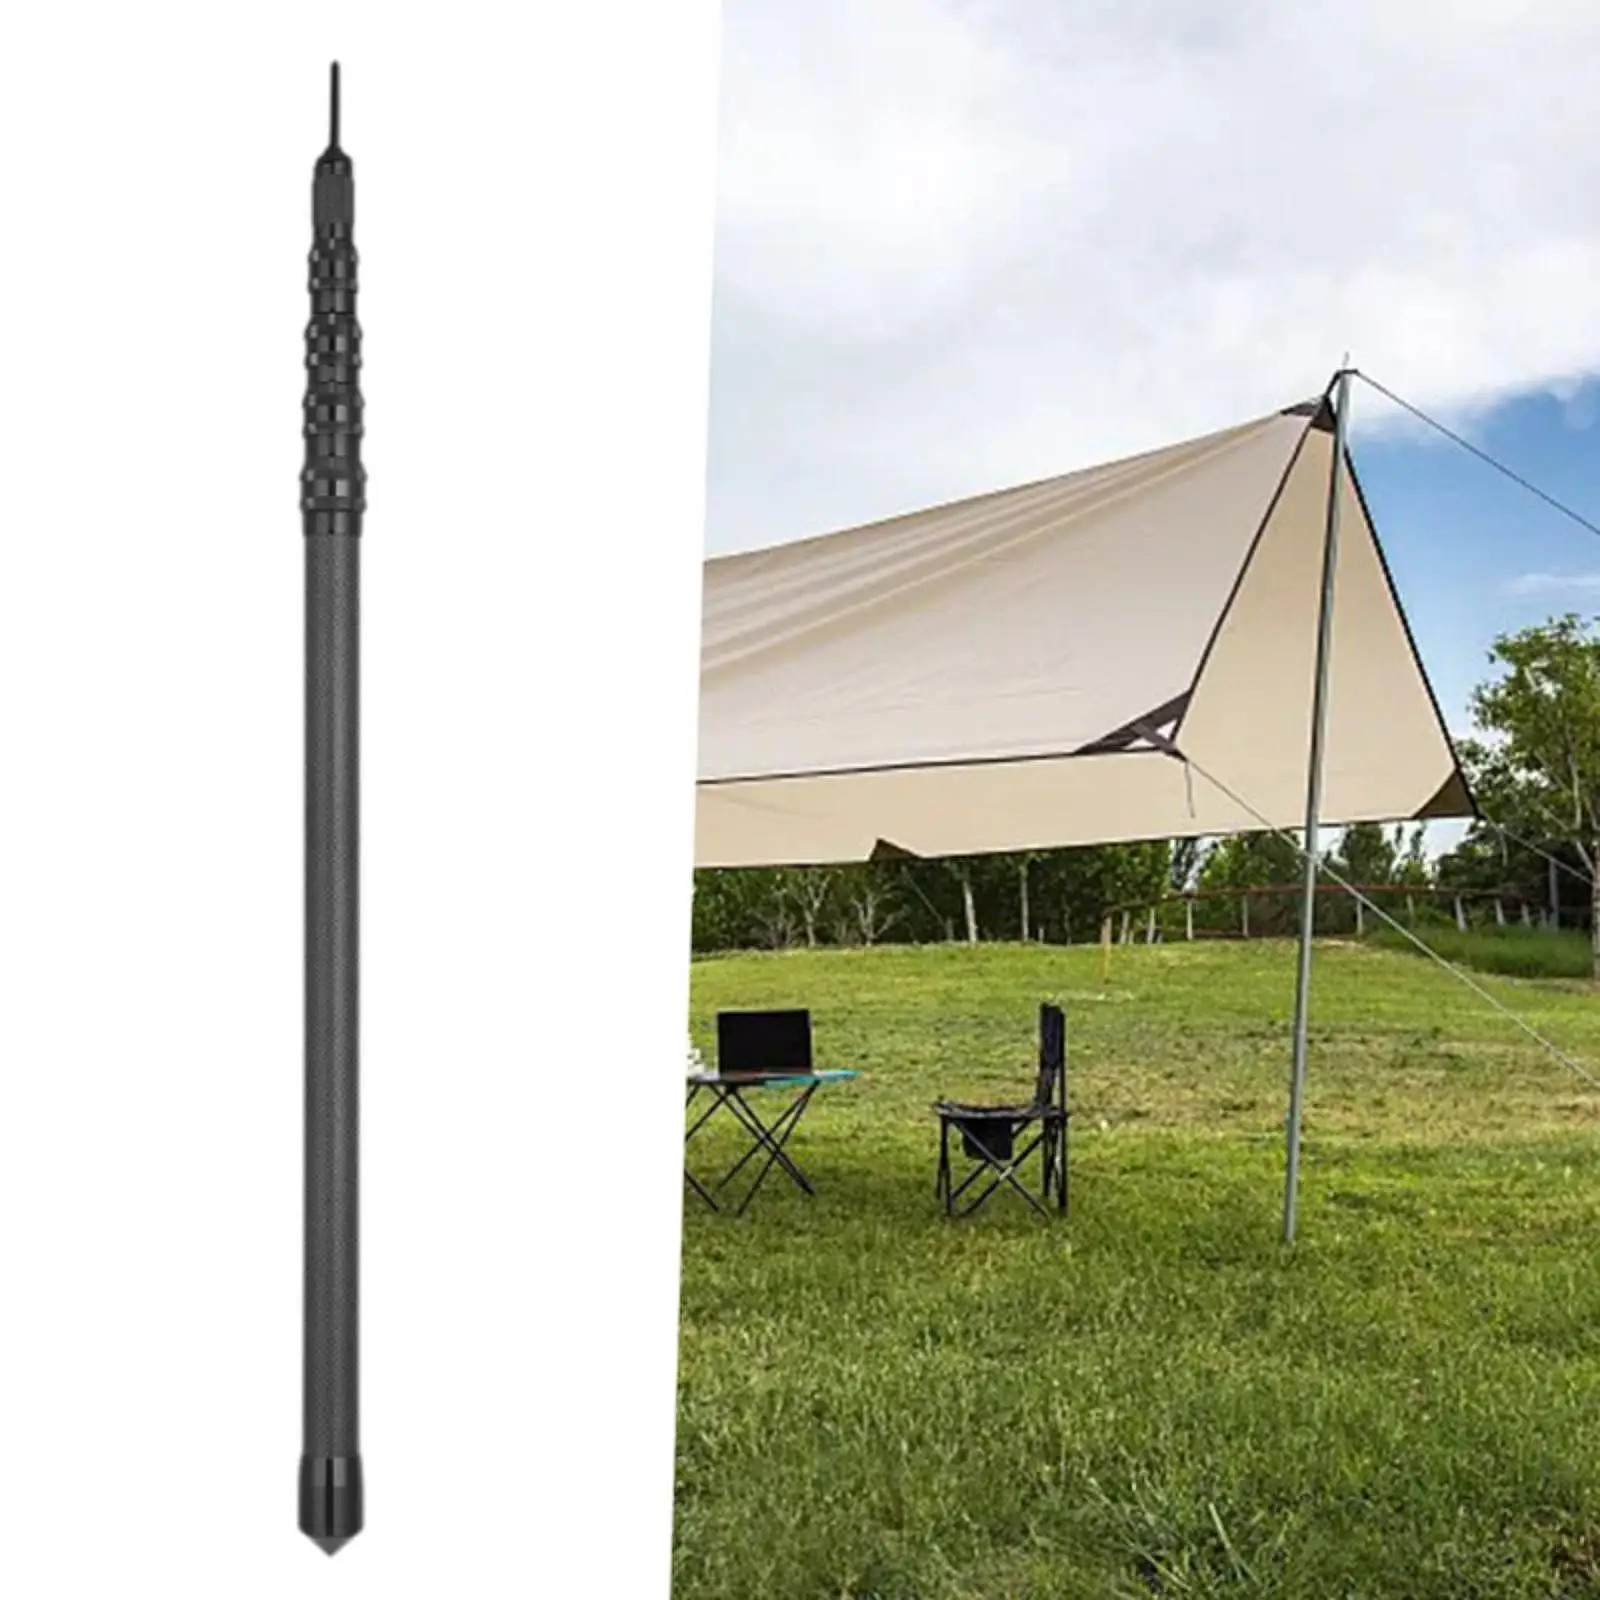 

Tent Pole Canopy Pole 67cm-300cm Lightweight Telescoping Support Pole Awning Pole for Hiking Porch Outdoor Picnic Backpacking